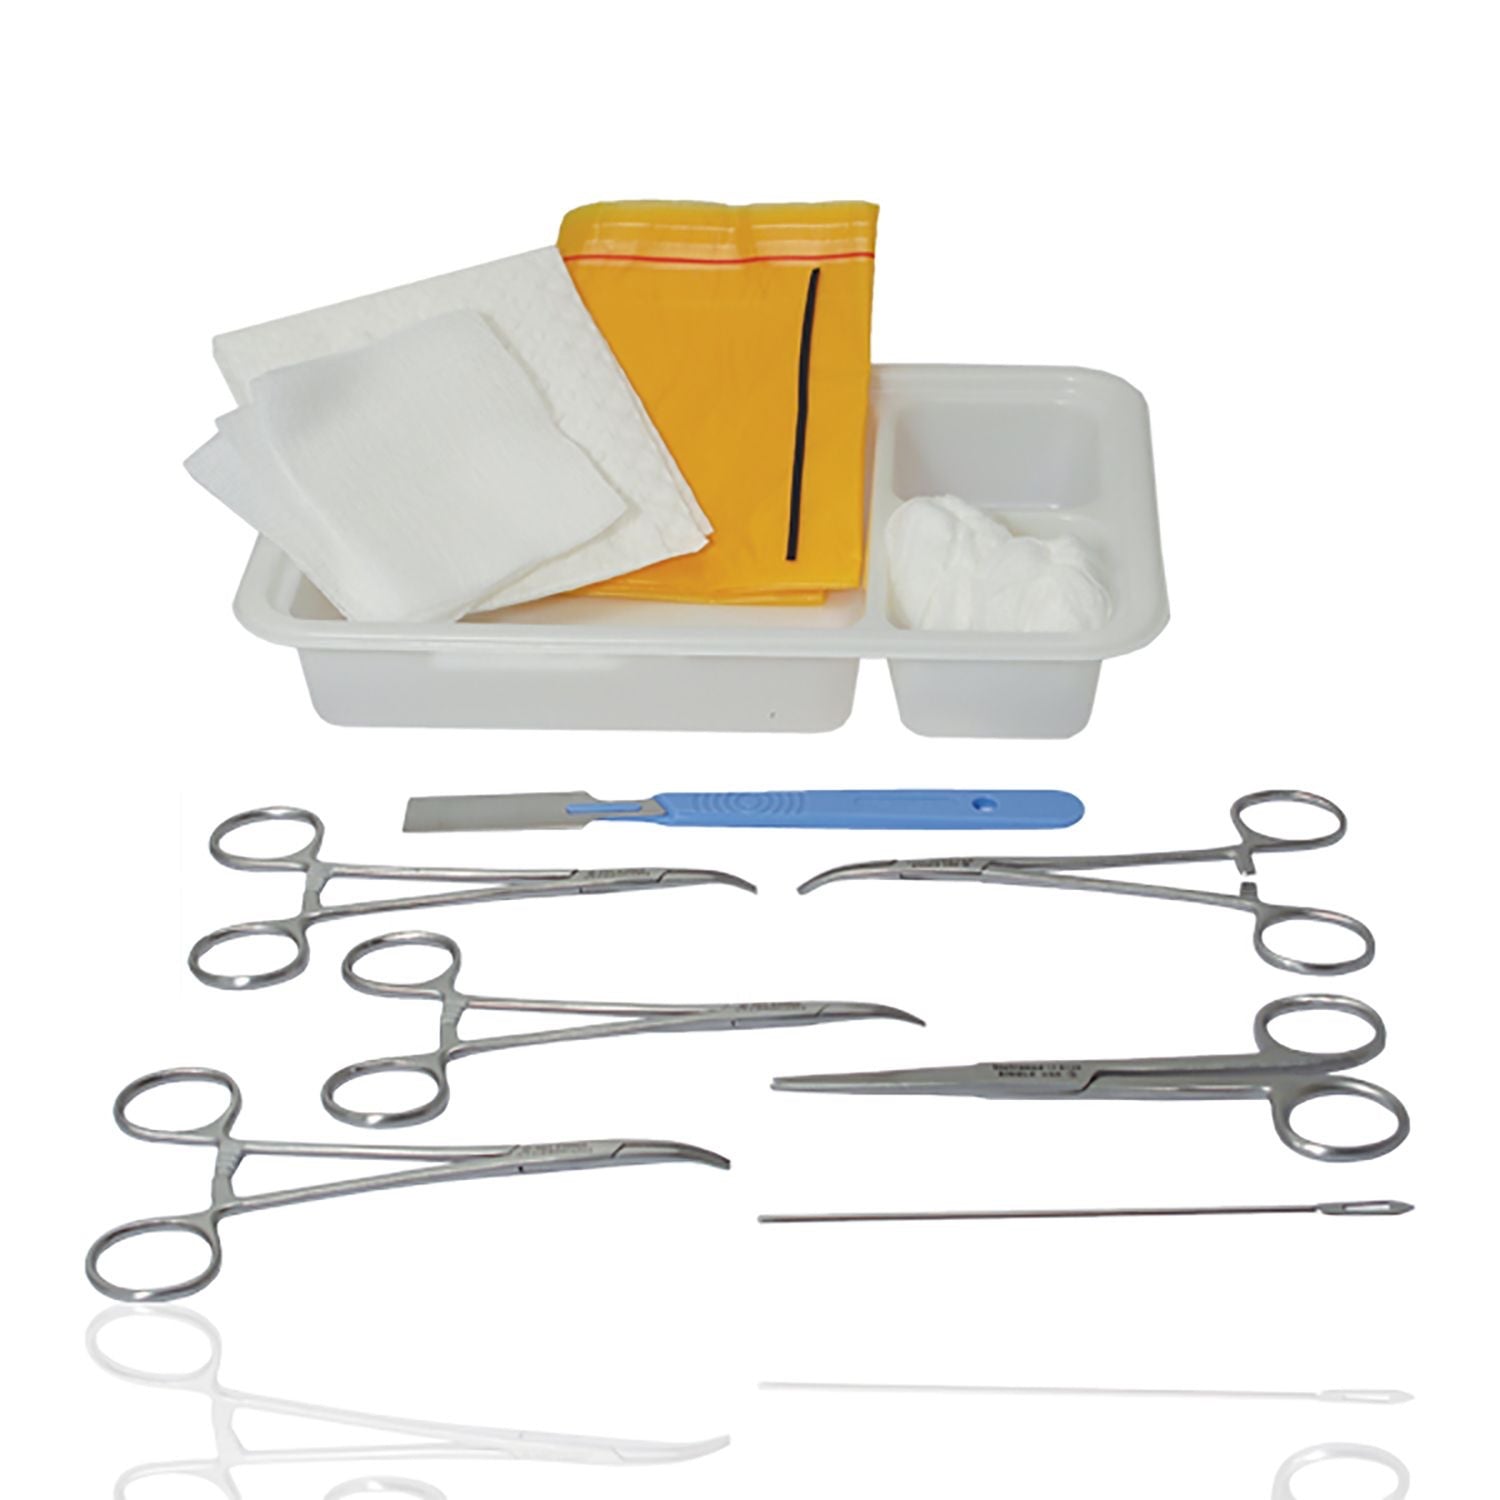 Instramed Circumcision Pack No. 1